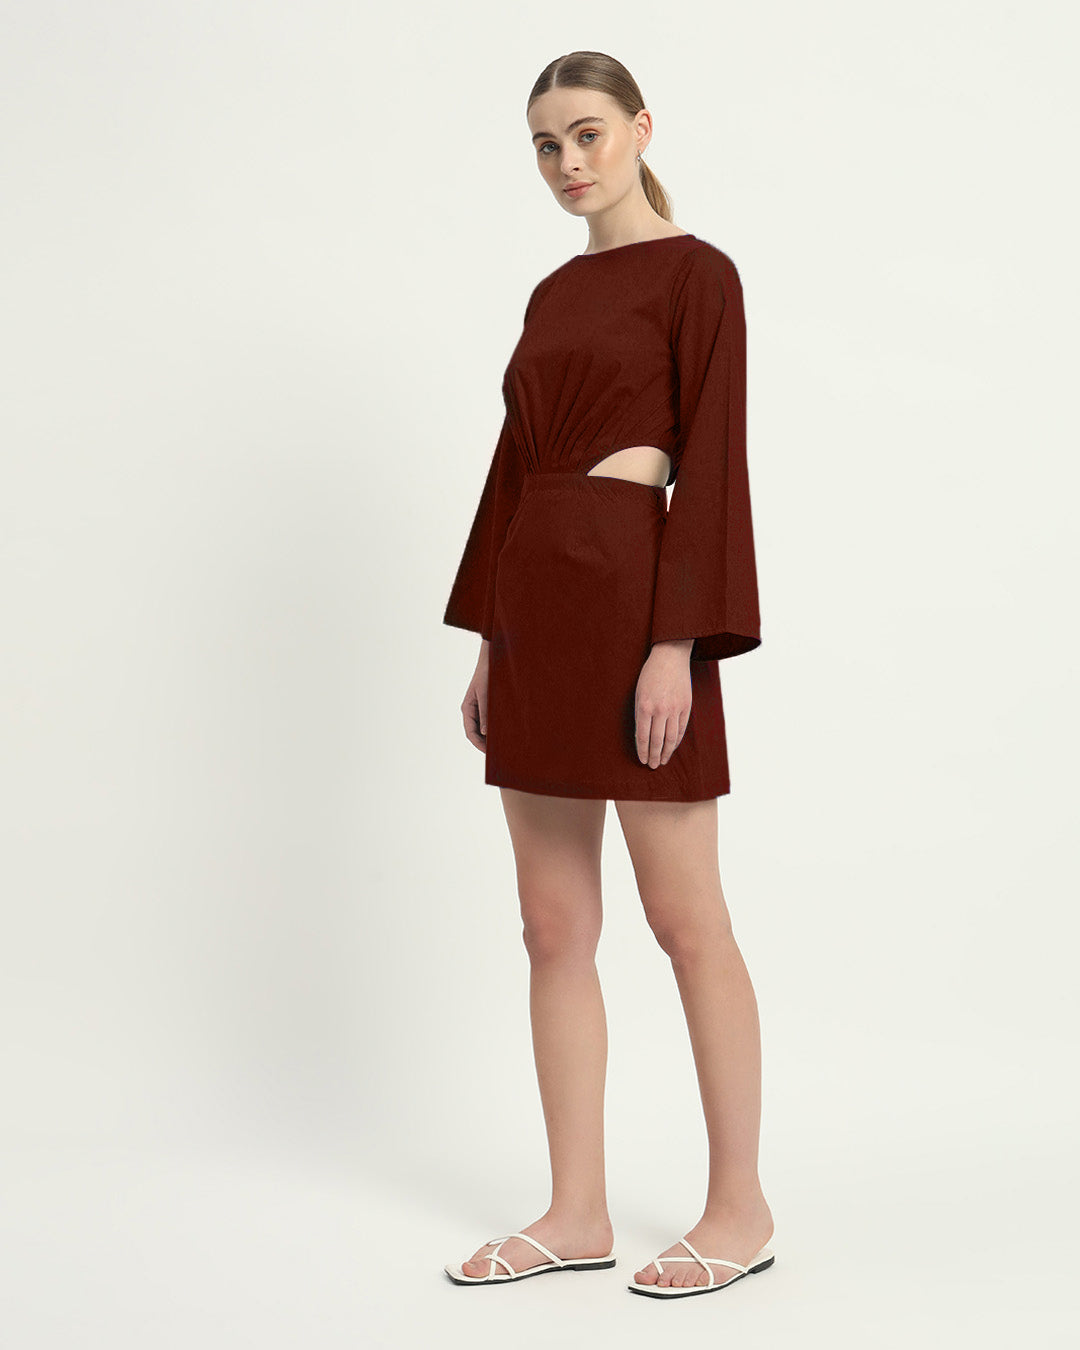 The Rouge Eloy Cotton Dress